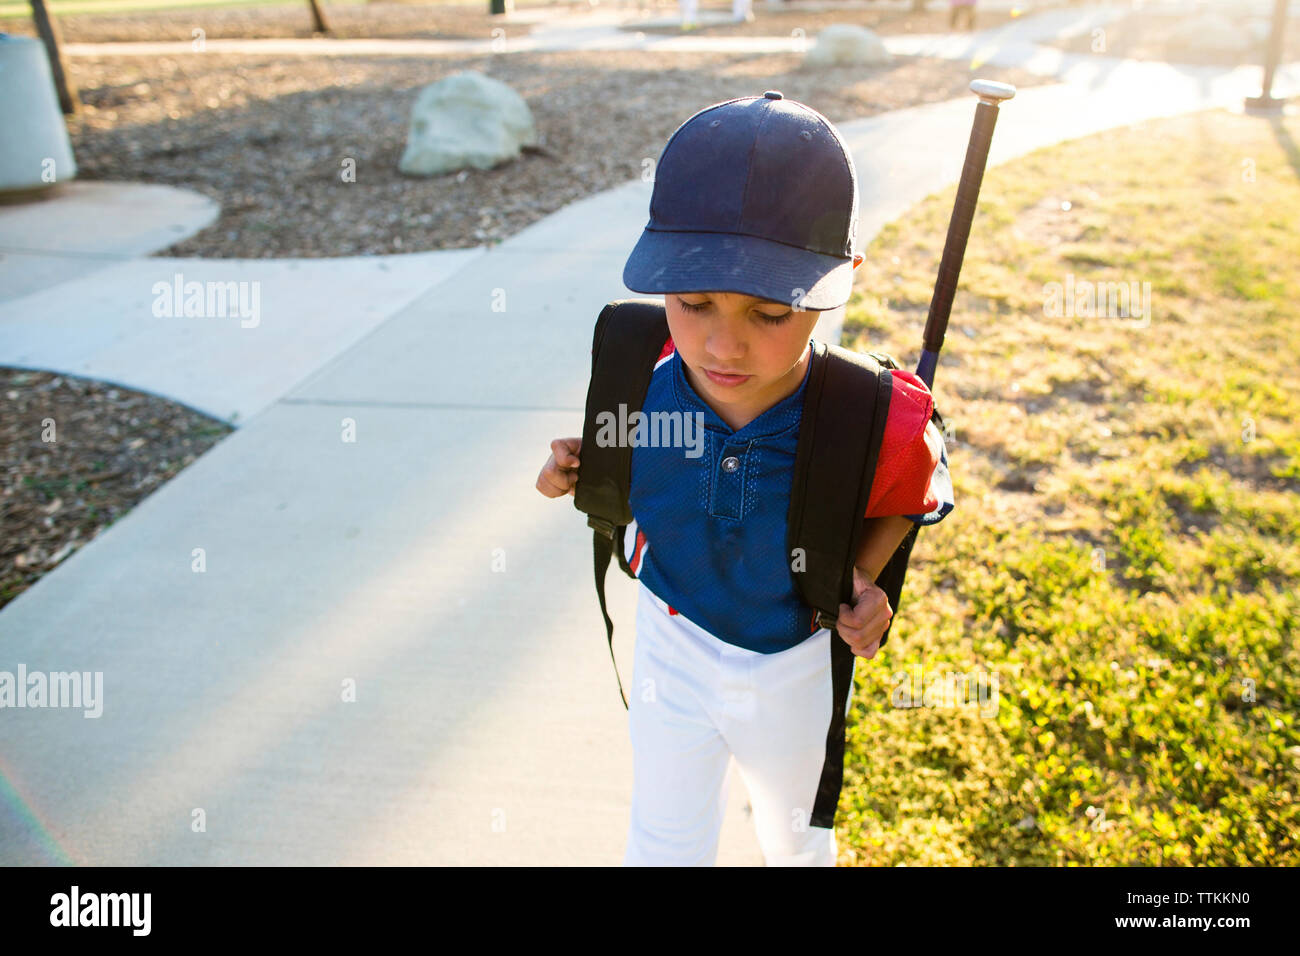 High angle view of boy in baseball uniform with backpack walking in yard Stock Photo